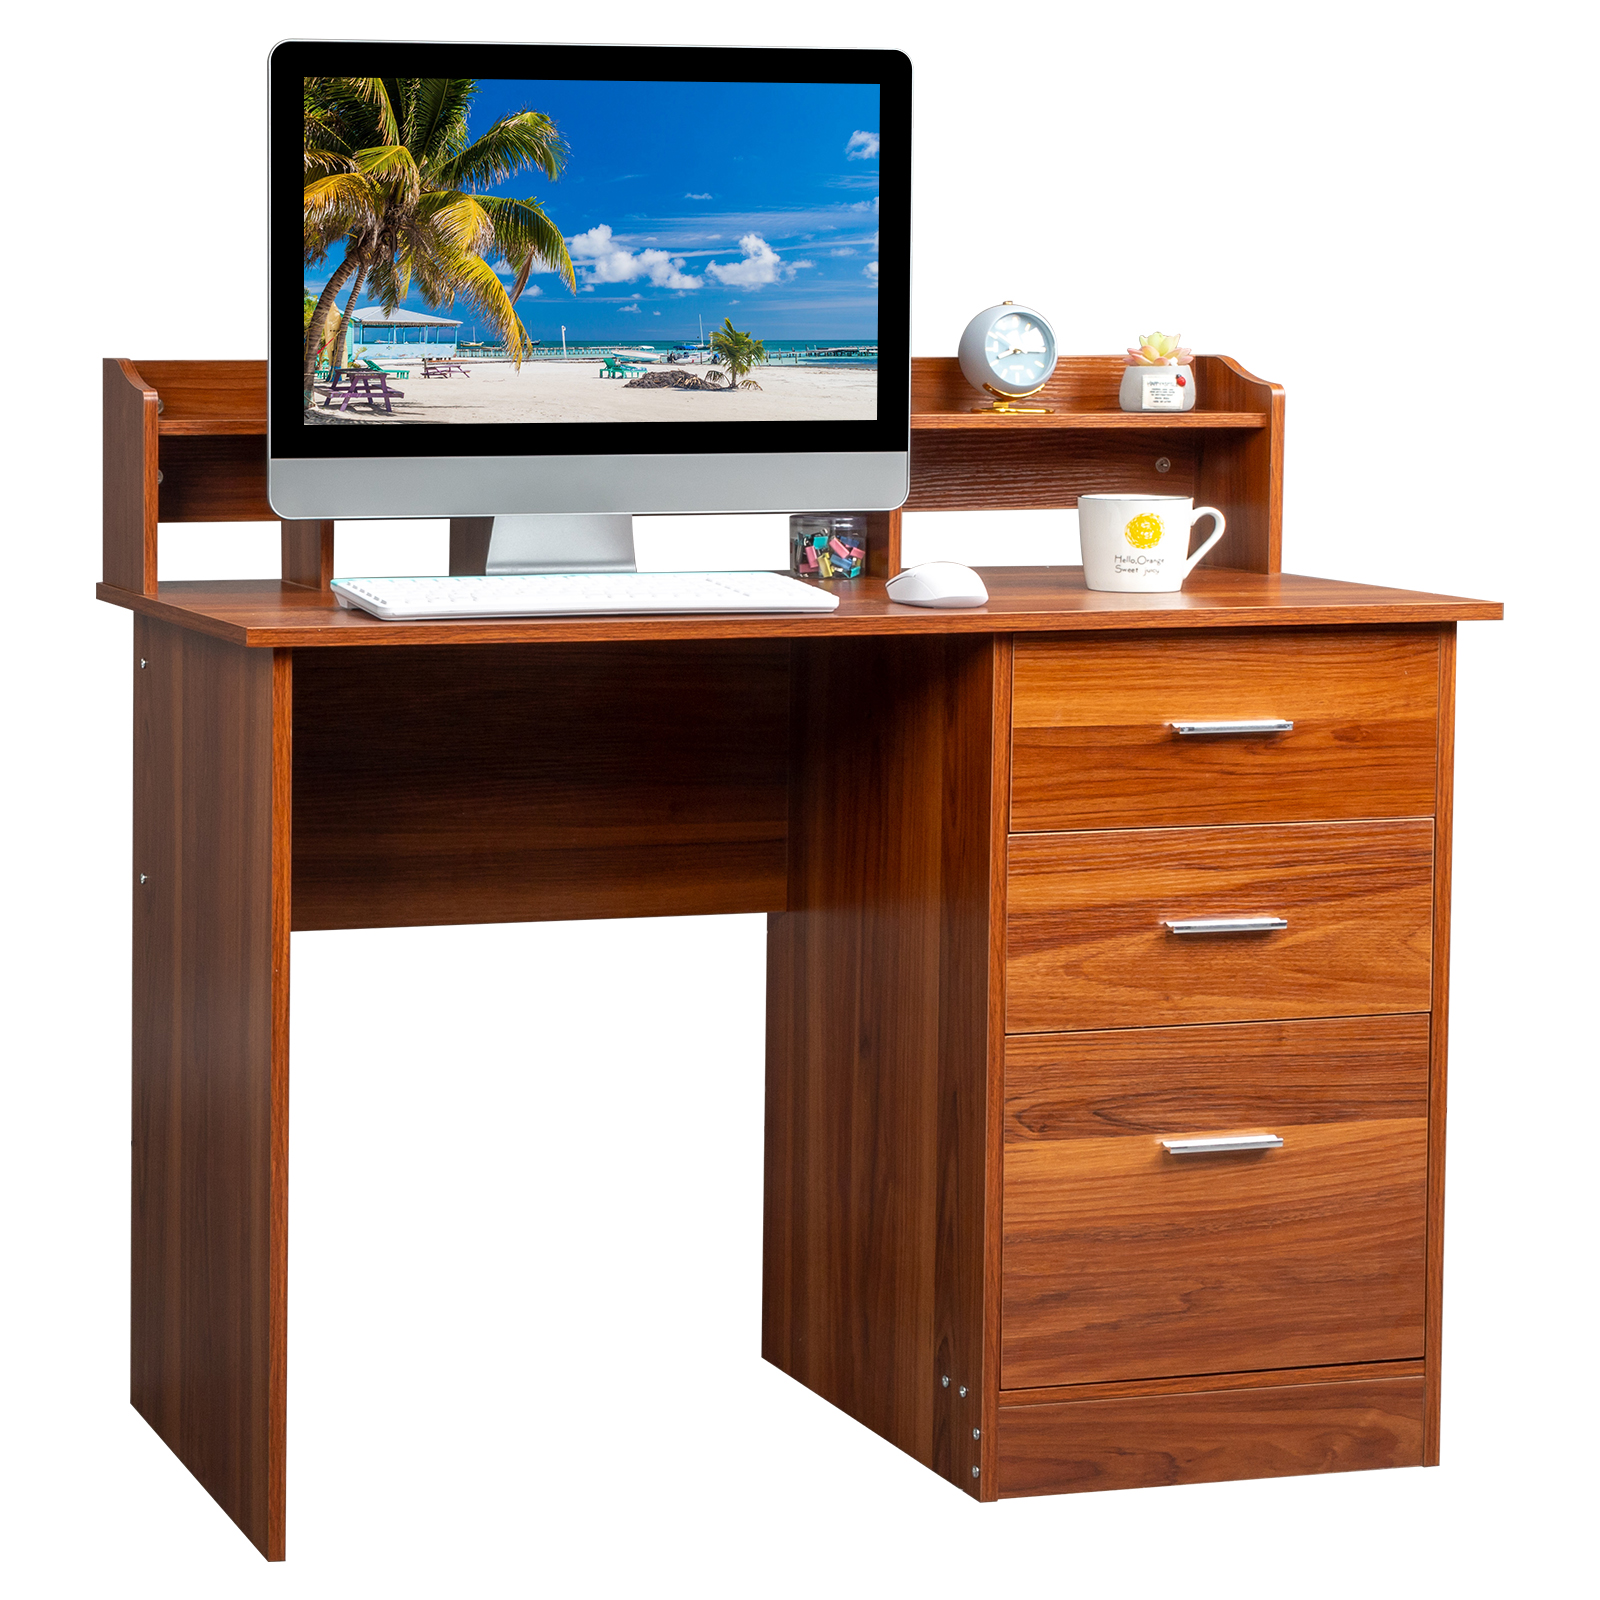 Ktaxon Wood Computer Desk Office Laptop PC Work Table, Writing Desk with 3 Drawers File Cabinet for Letter Size,Wulnut - image 1 of 13